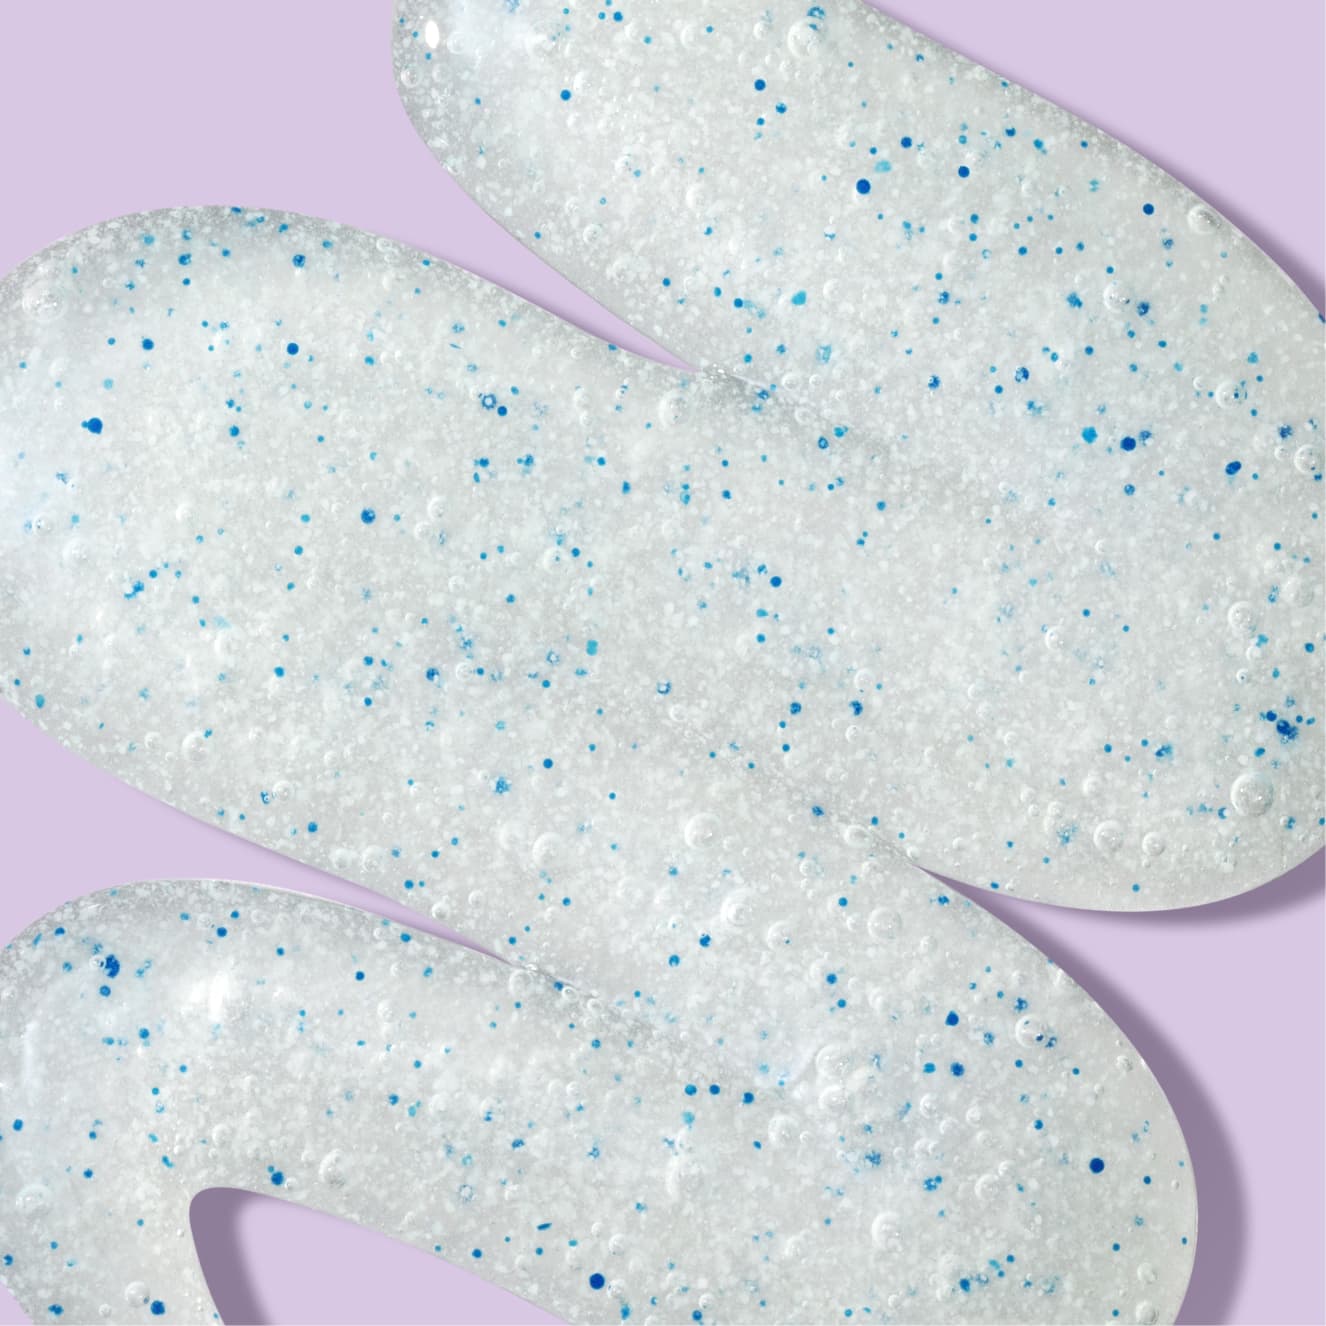 White paste with blue beads over light purple background